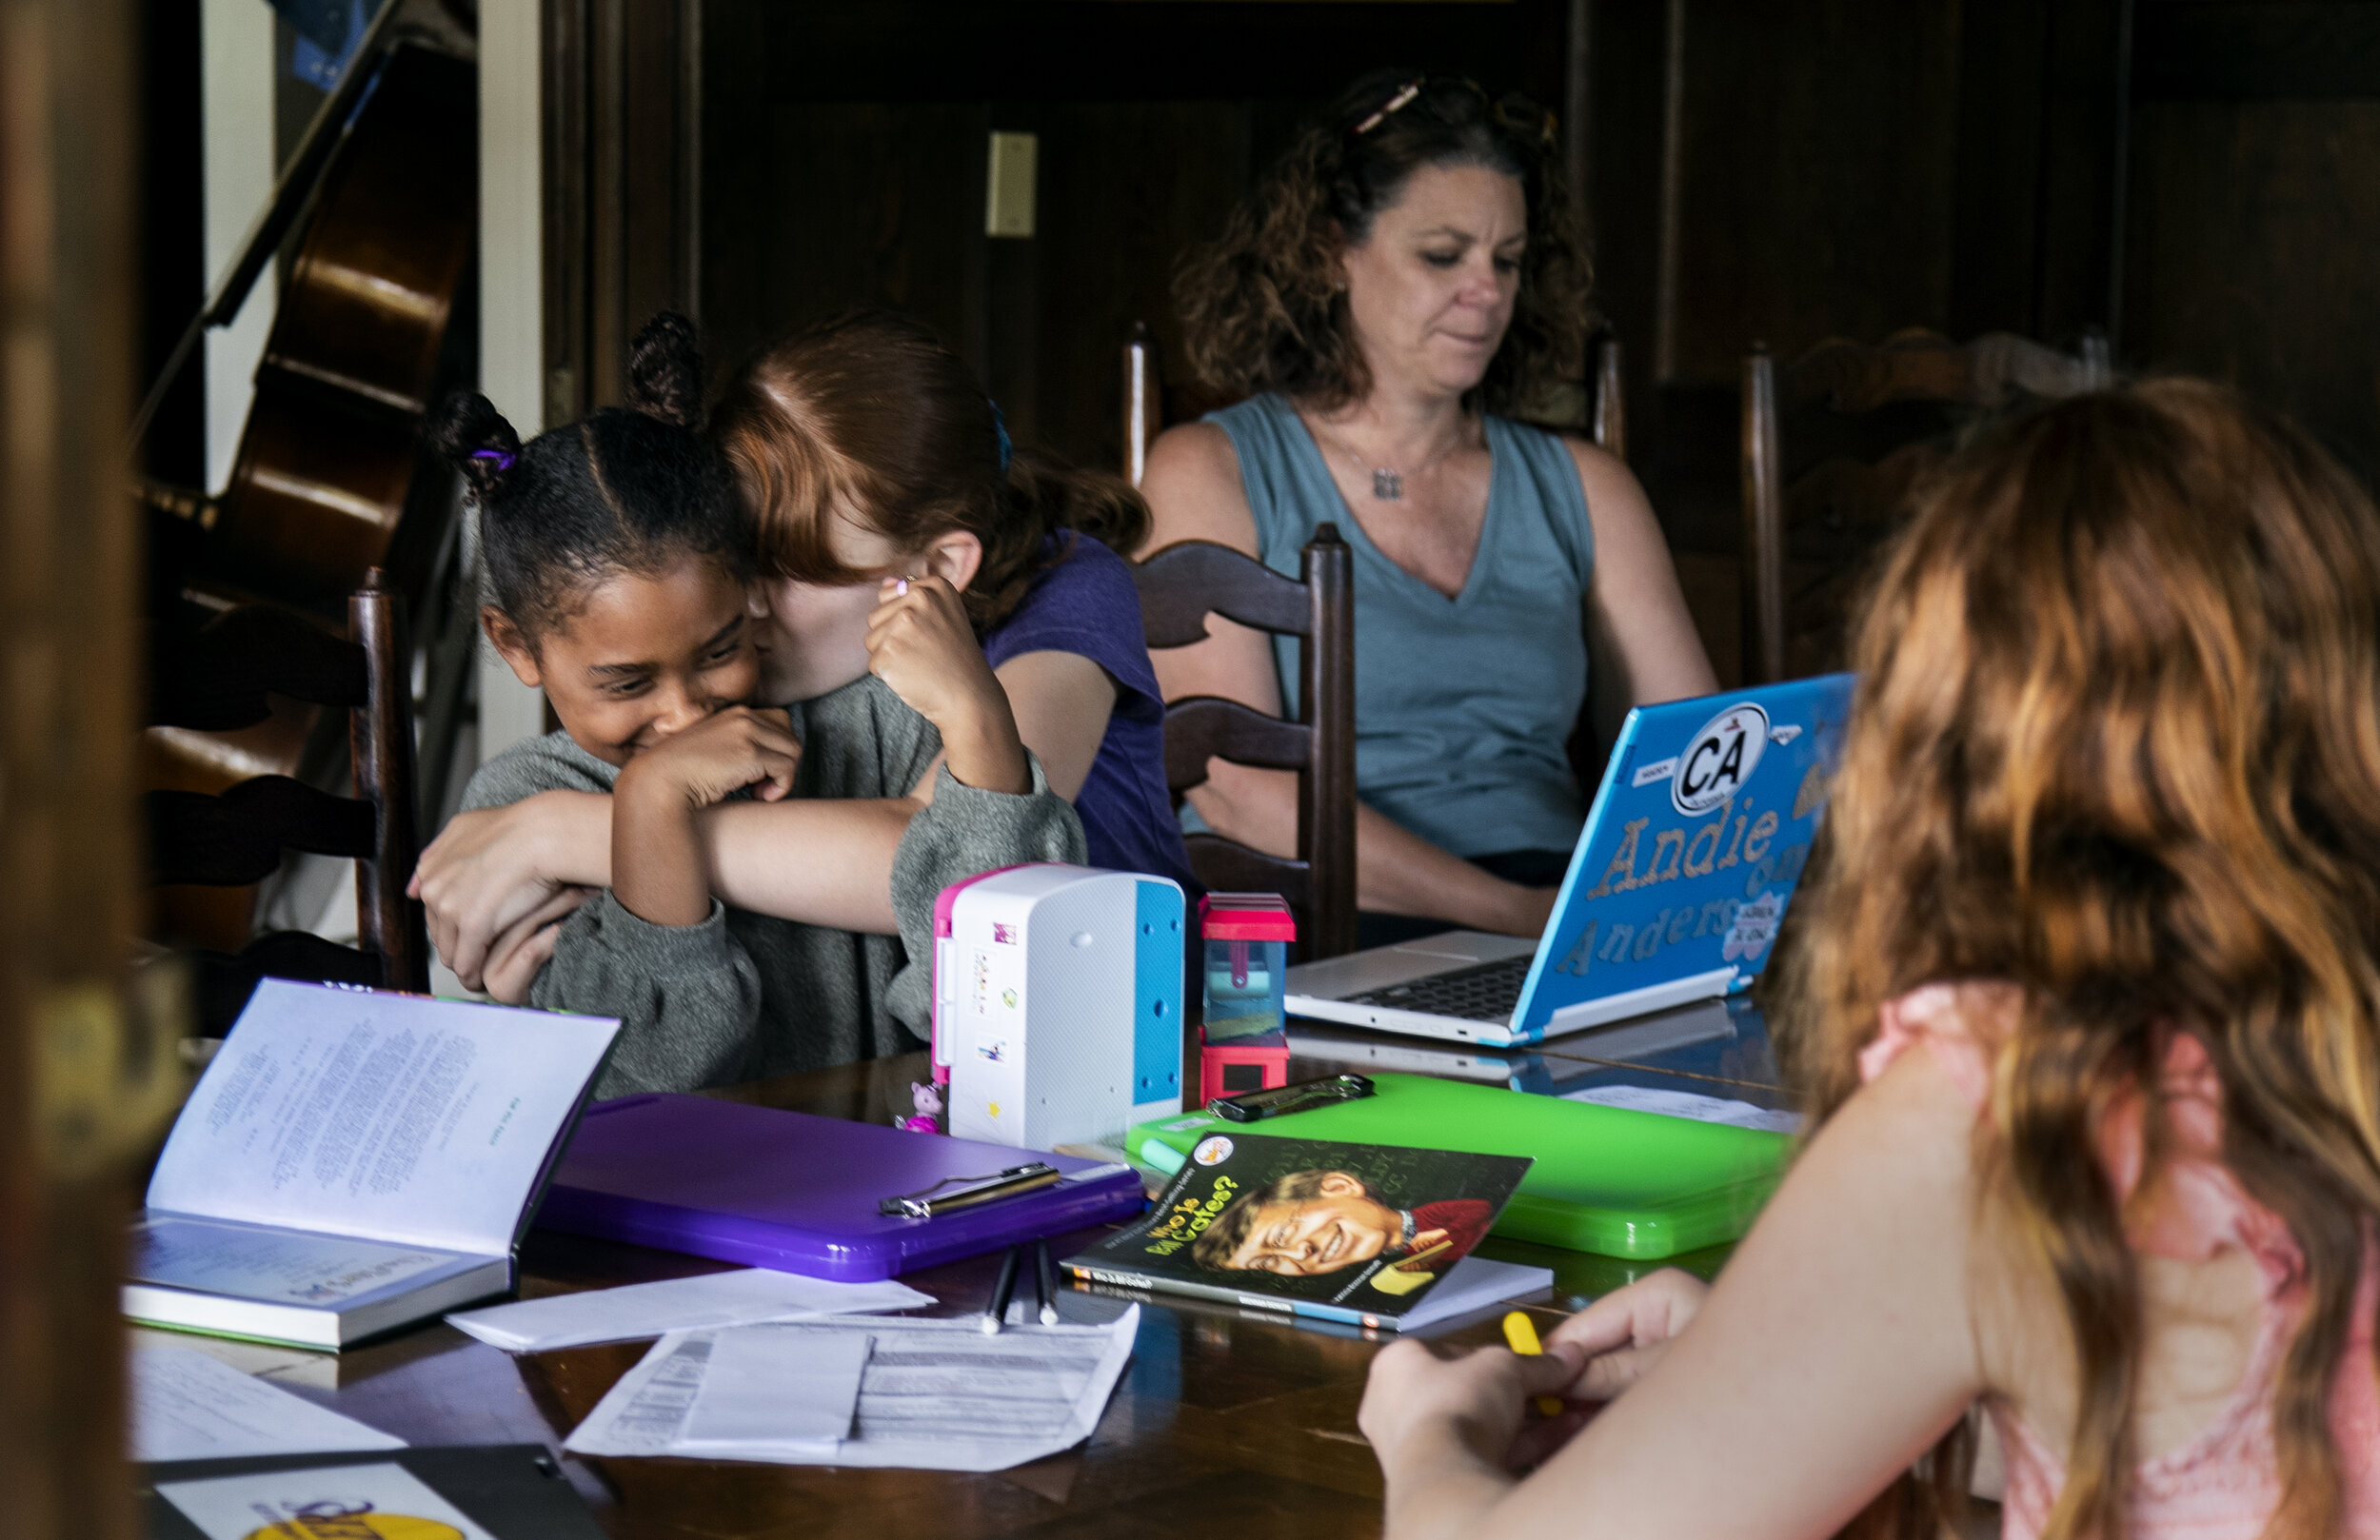  RIVERSIDE, CA- APRIL 29, 2020: Kat Bristow, 12, snuggles her sister Andie, 6, while they team up for a science presentation during home school in the midst of the coronavirus pandemic on April 29, 2020 in Riverside, California. Their mom, former thi